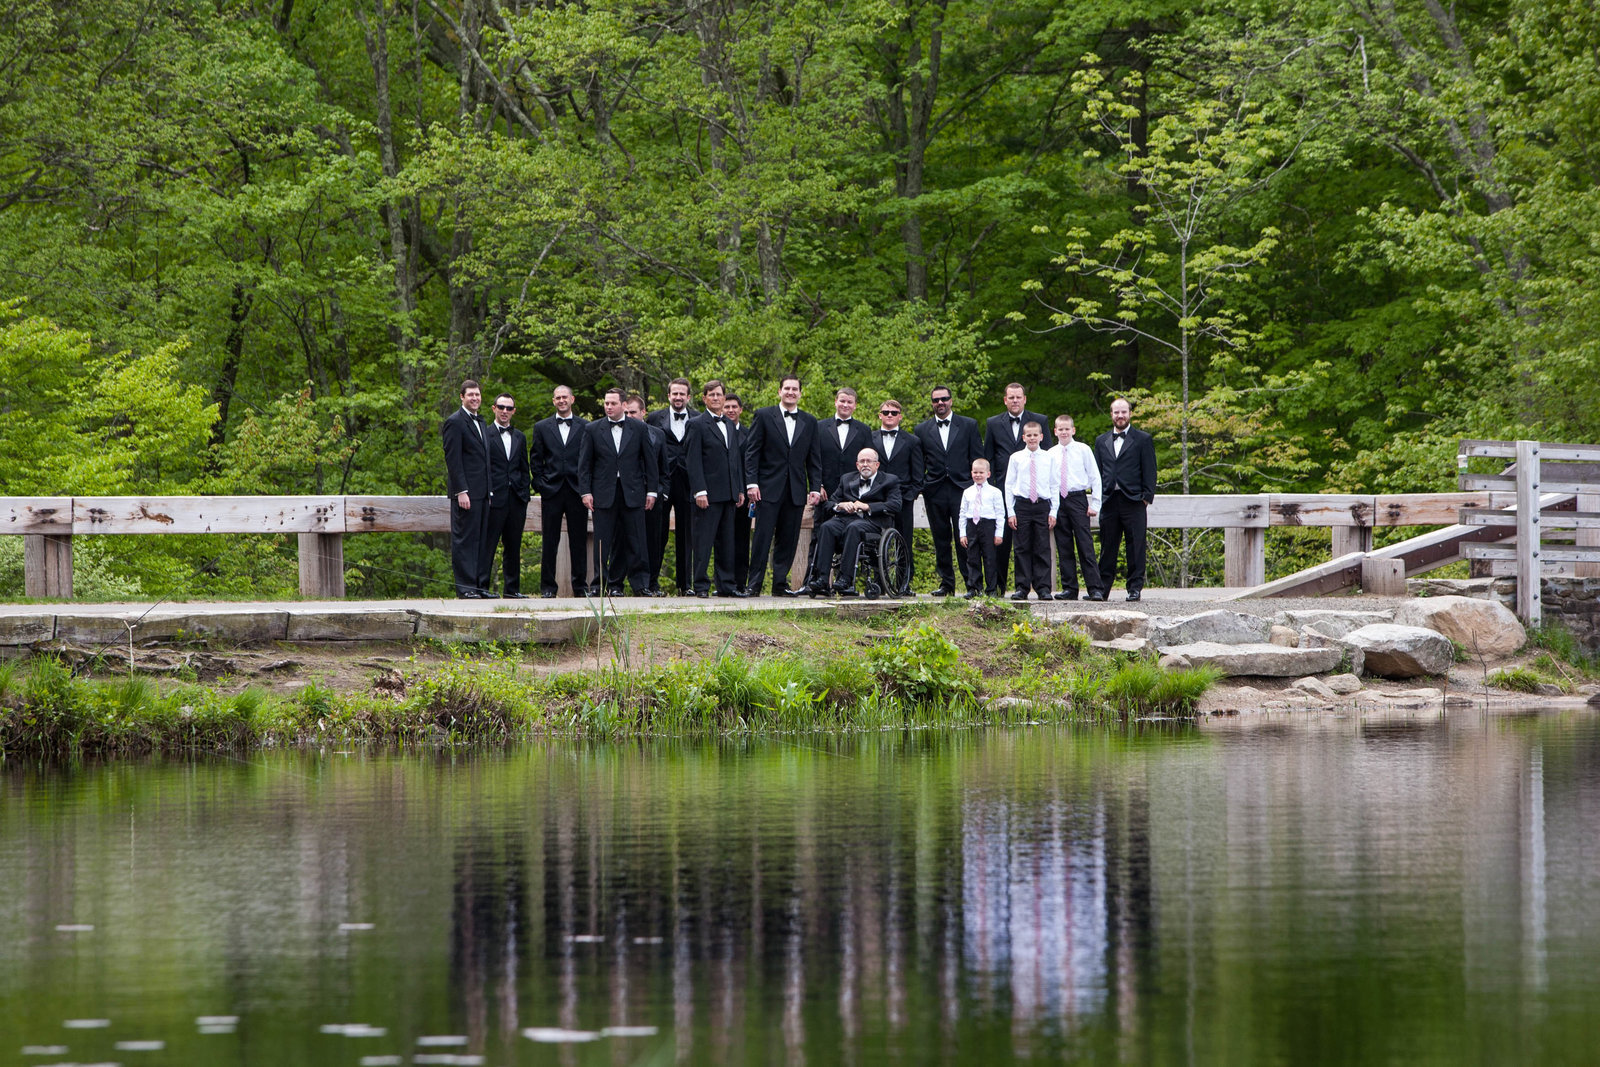 Waterfront bridal party photography